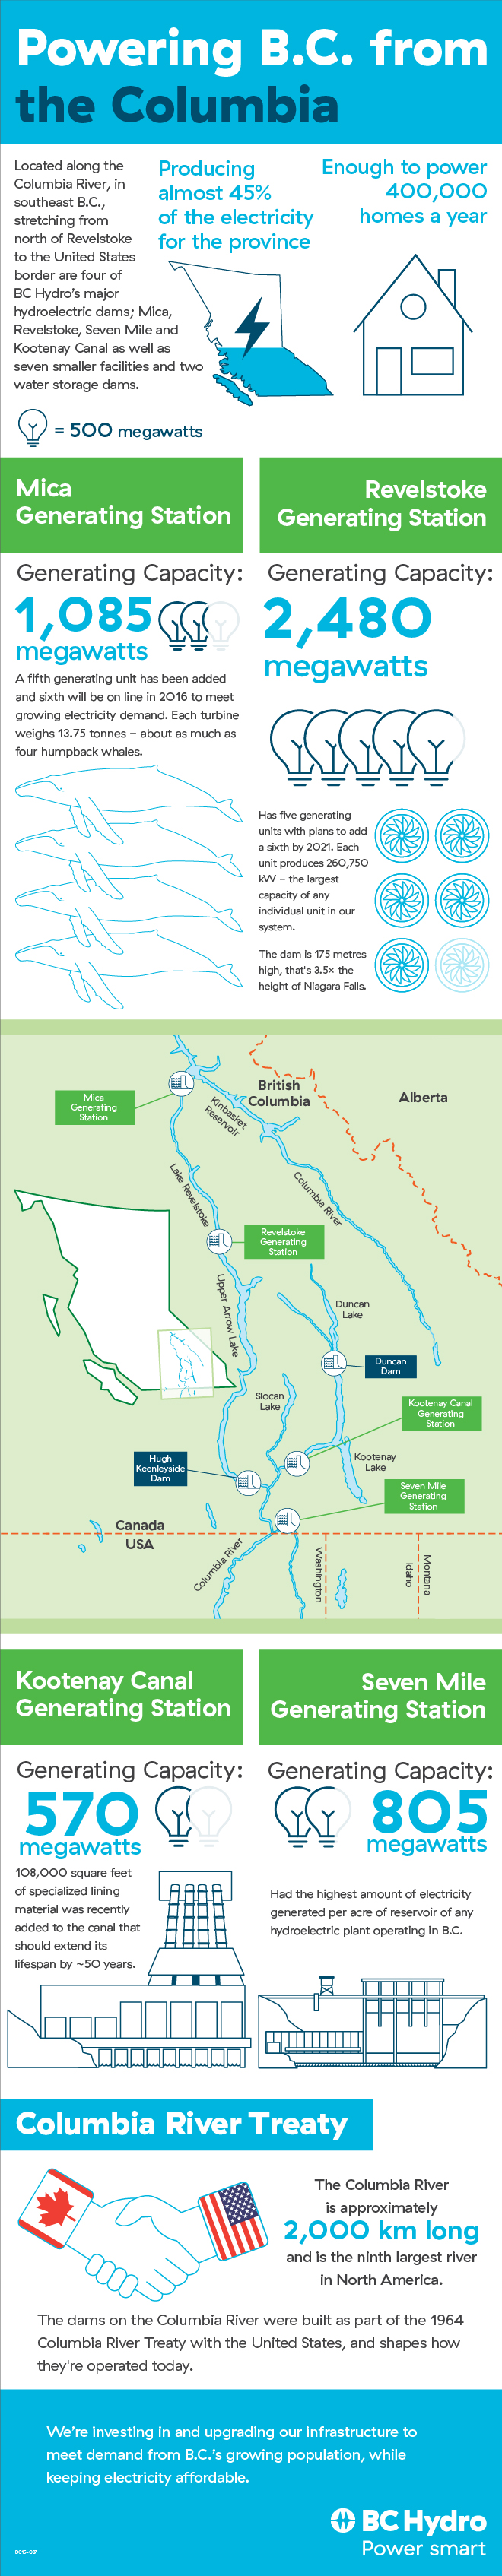 Powering B.C. from the Columbia